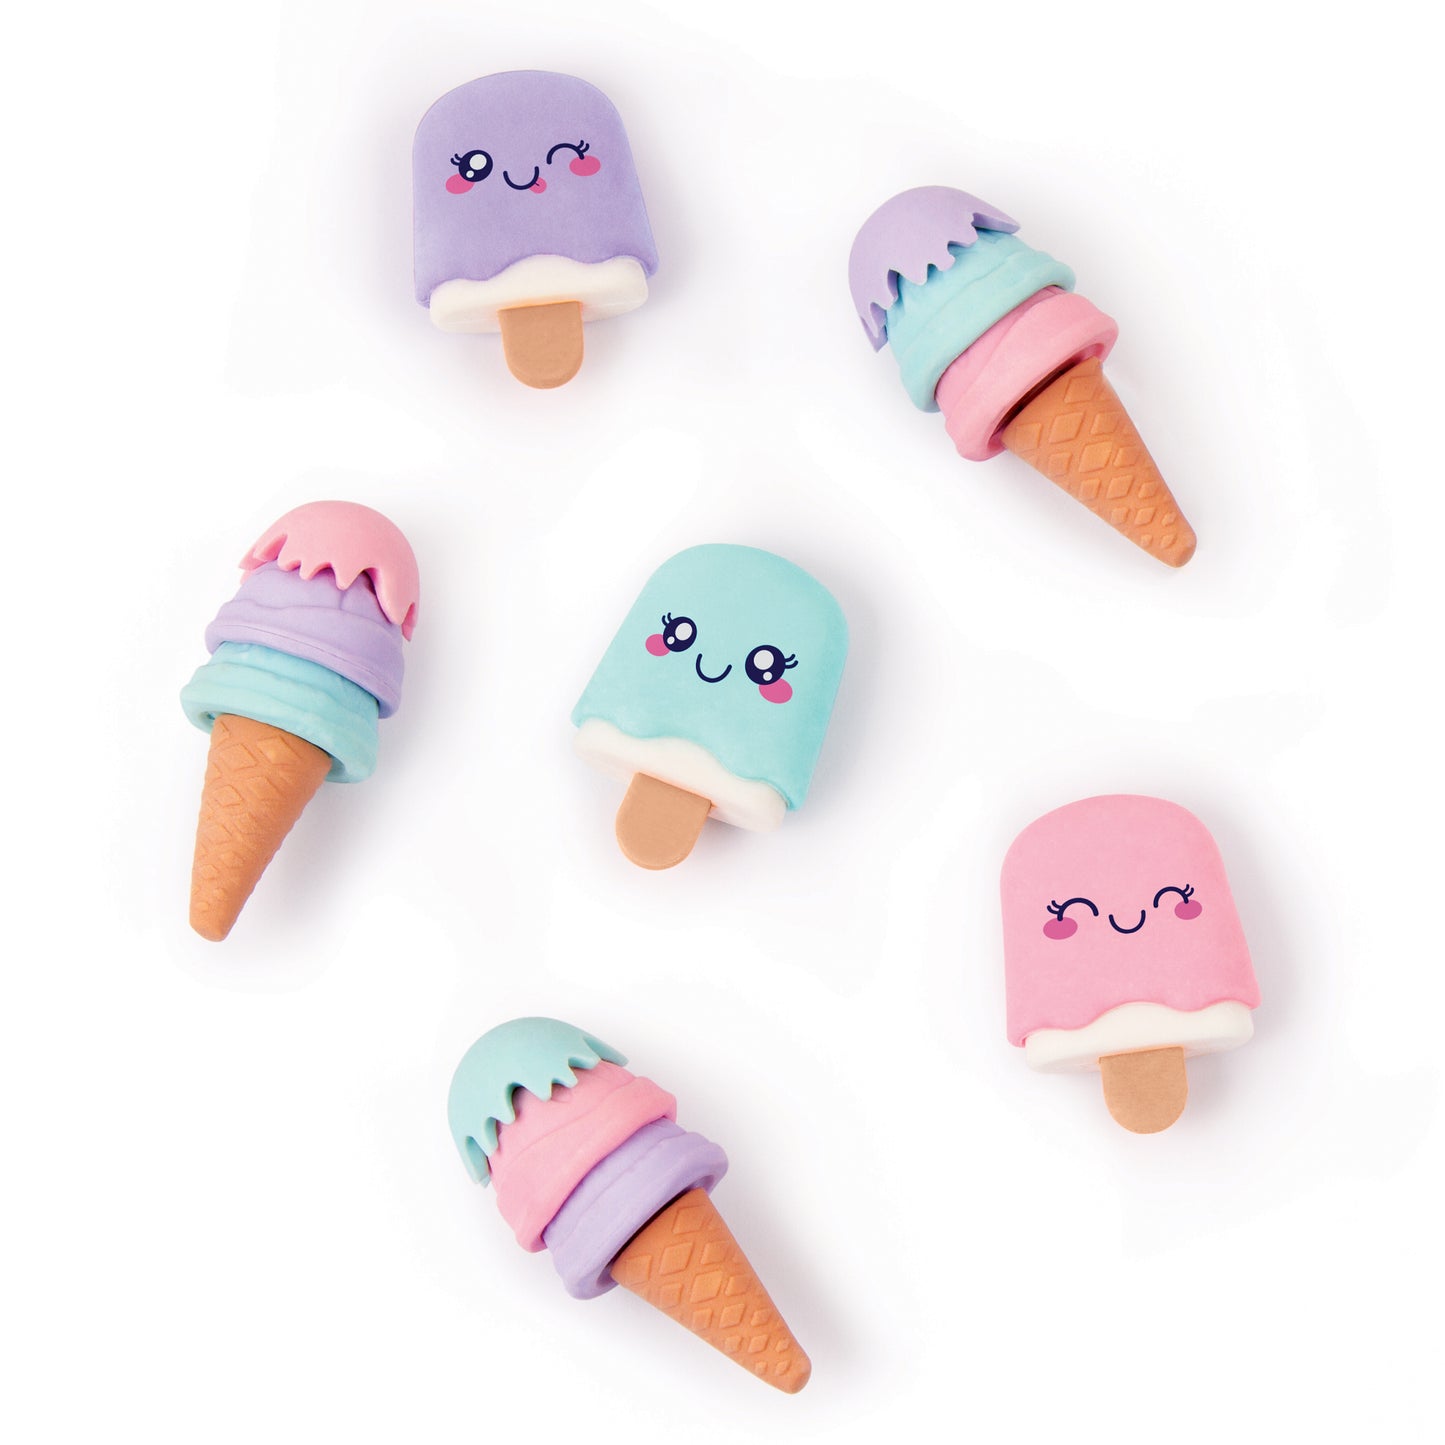 The cutest erasers you'll see today😍 #funerasers #minierasers #cuteer